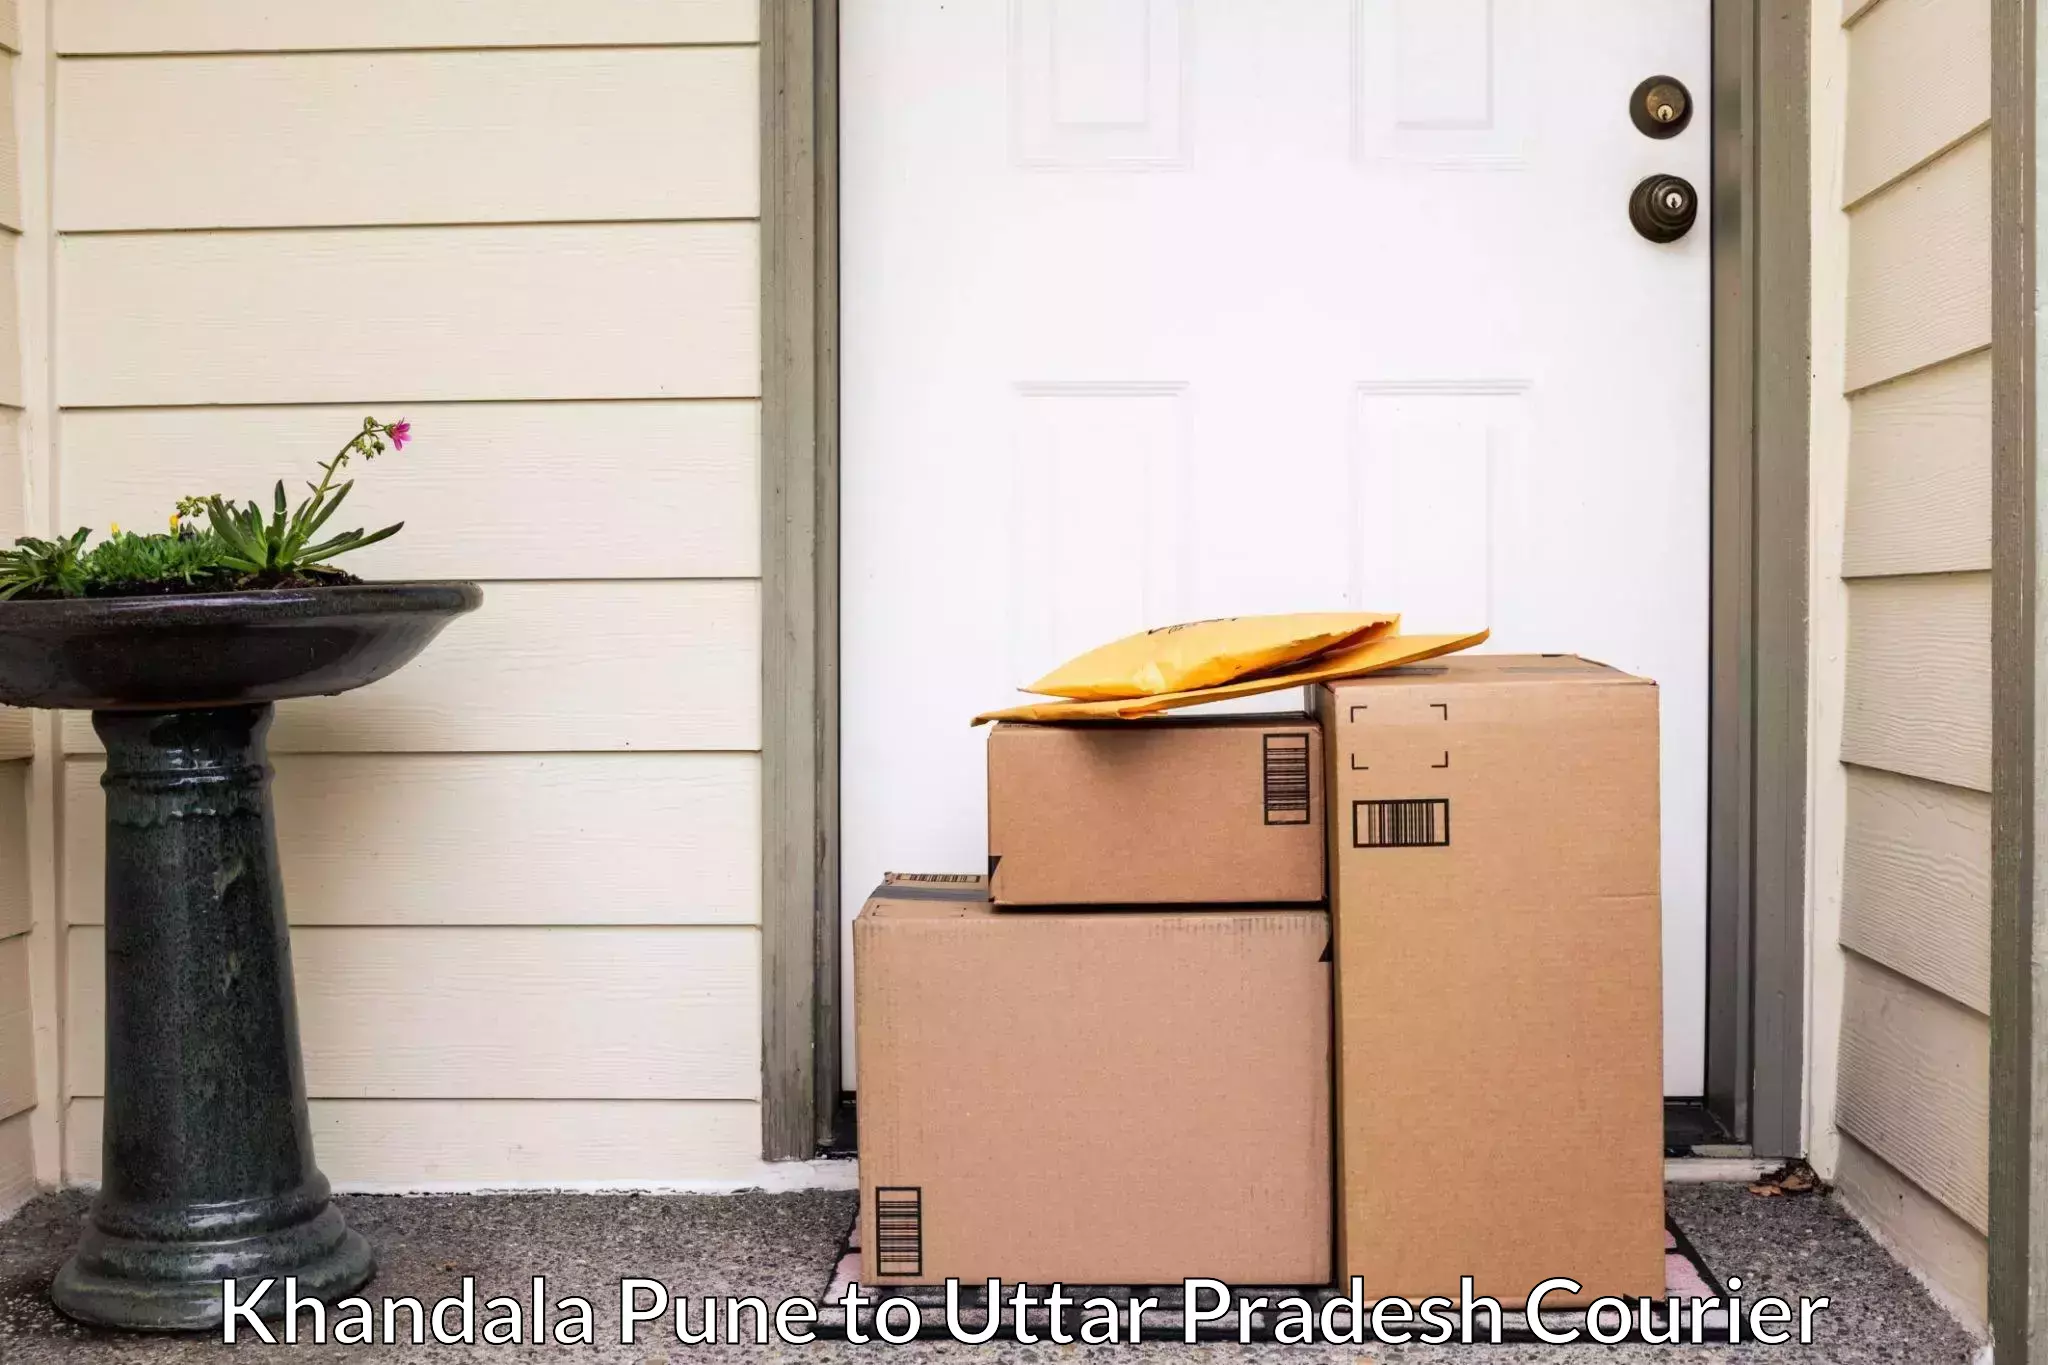 Specialized moving company Khandala Pune to Rajesultanpur